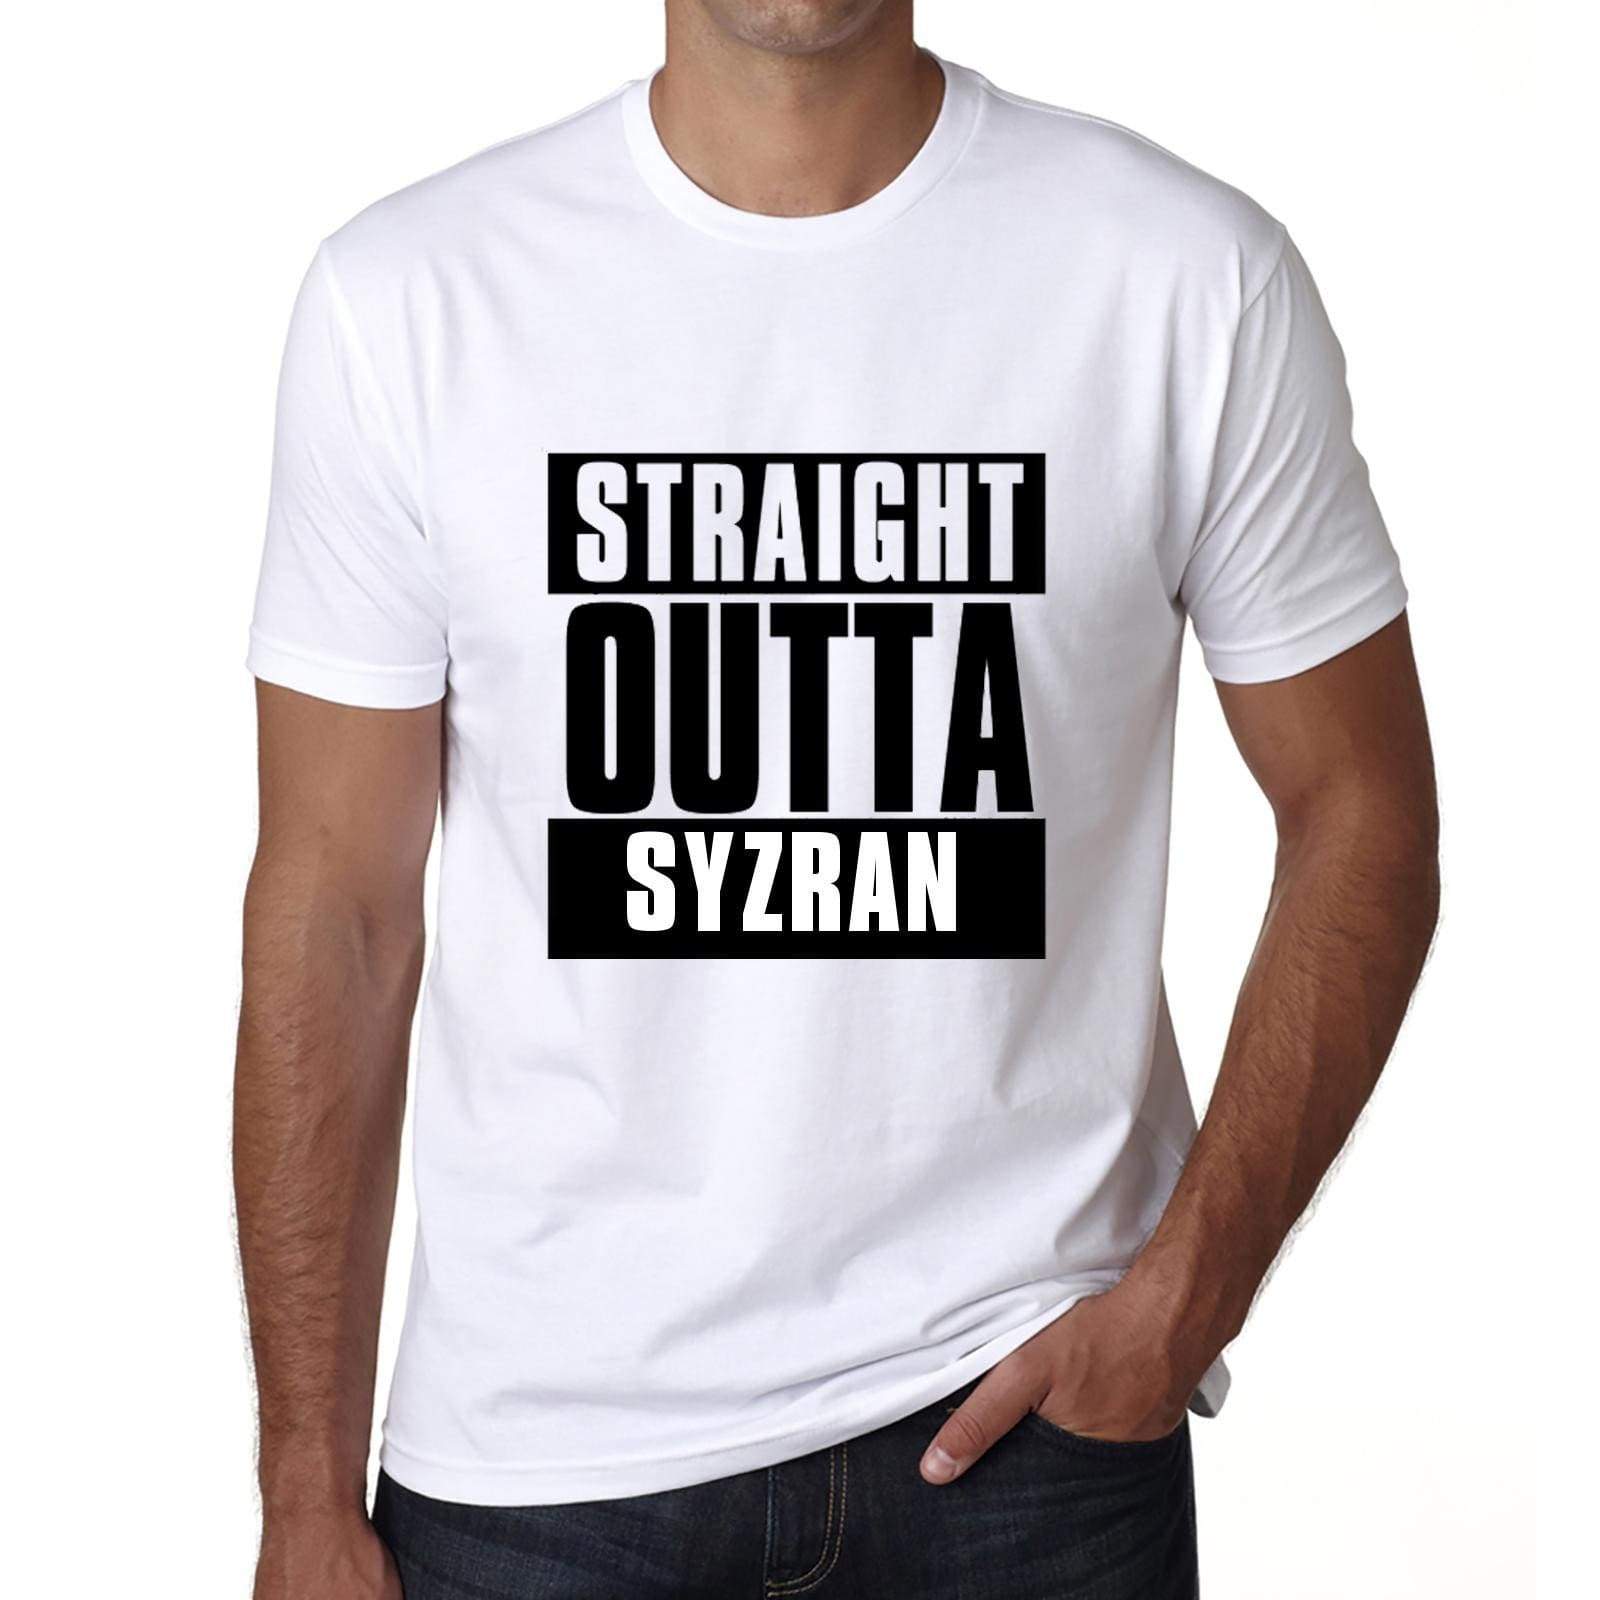 Straight Outta Syzran Mens Short Sleeve Round Neck T-Shirt 00027 - White / S - Casual